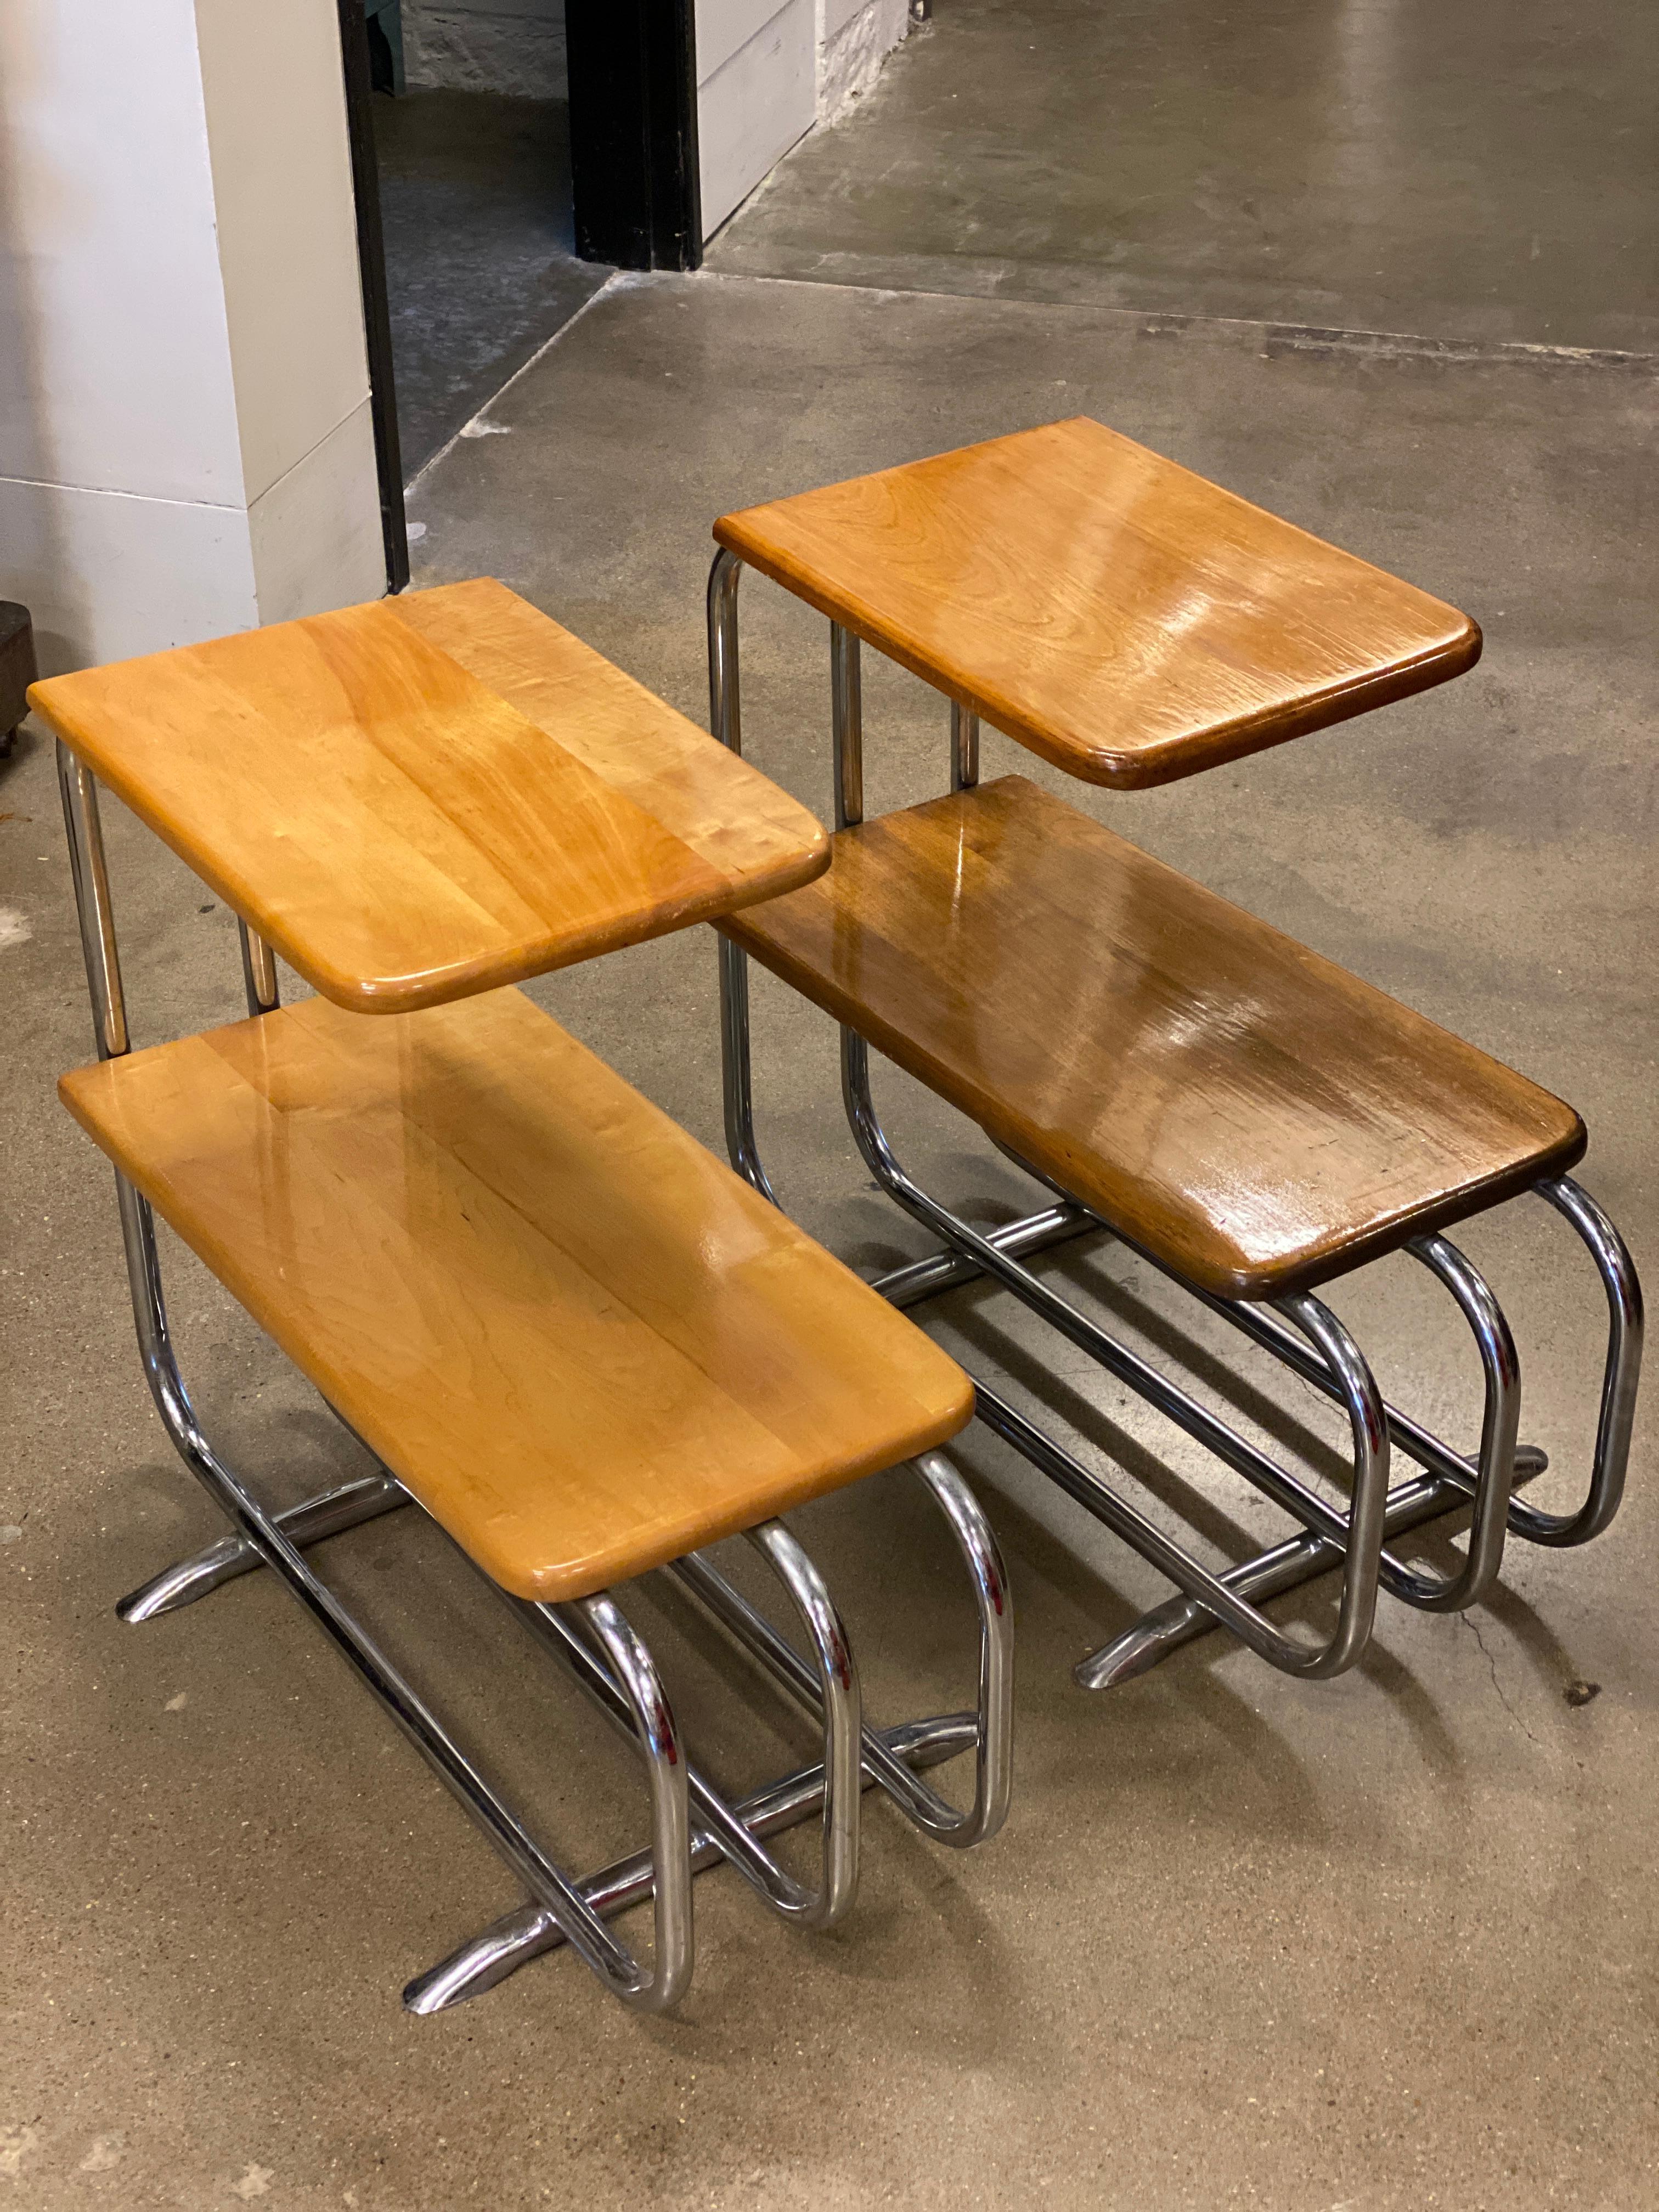 Pair of side tables by German industrial designer, Alfons Bach. Art Deco style tubular steel frames with hardwood top and lower surfaces. Produced by Lloyd Manufacturing Company in Menominee, Michigan, from the 1930s until 1947.